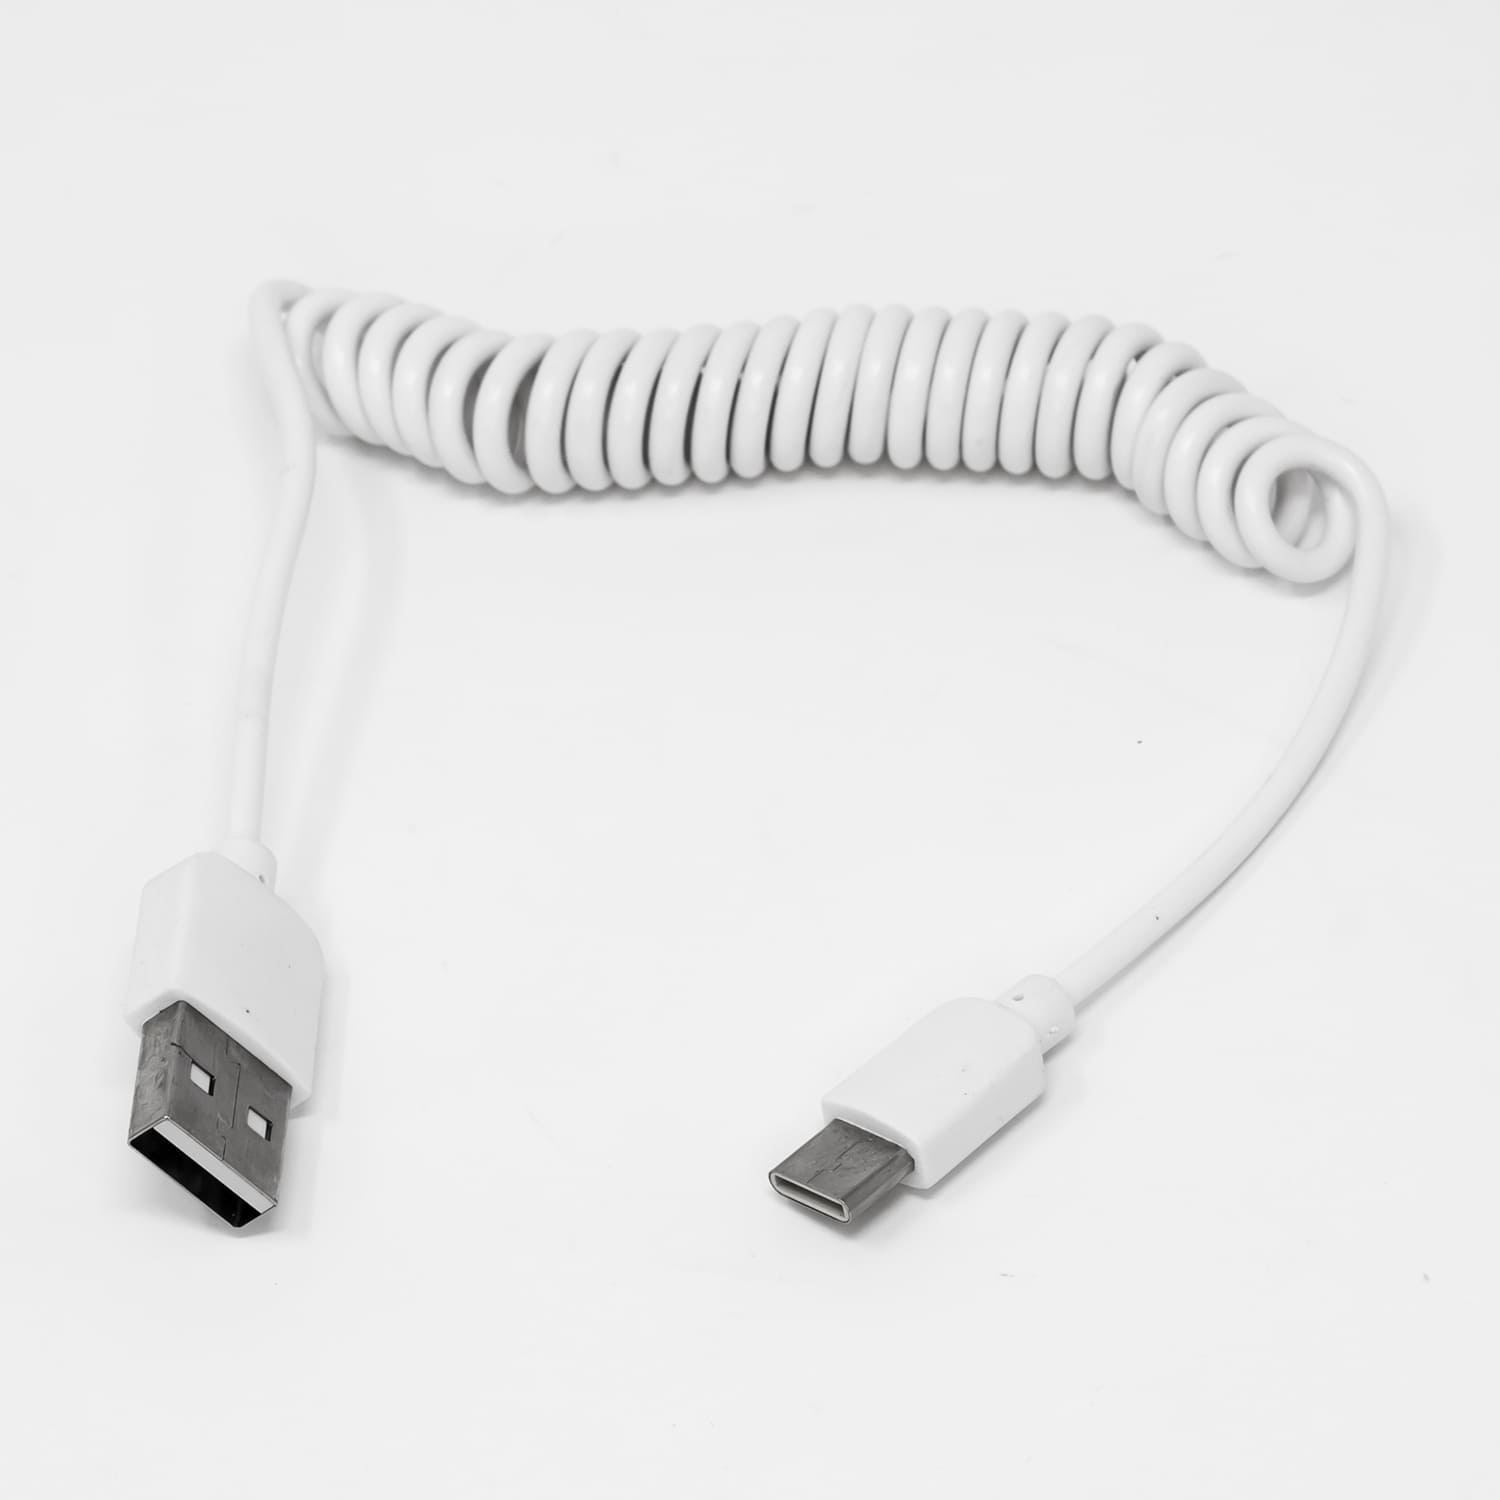 Data Cables Design for USB Type C Devices